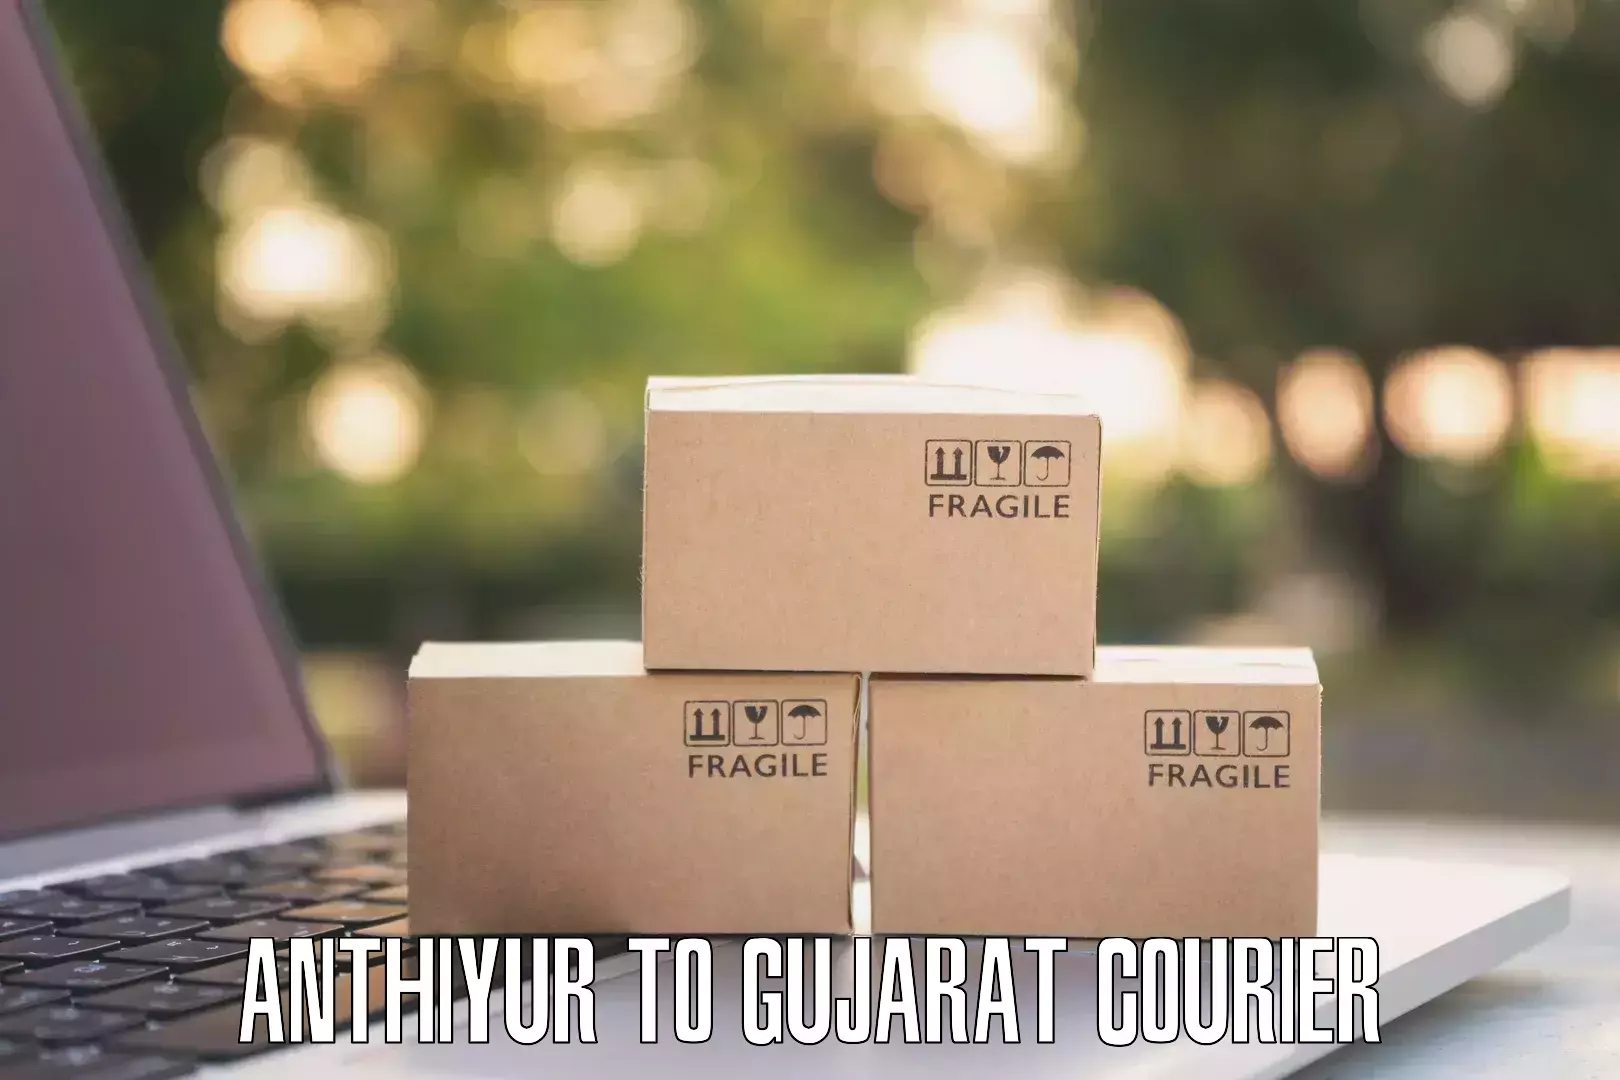 Full-service courier options Anthiyur to Kachchh